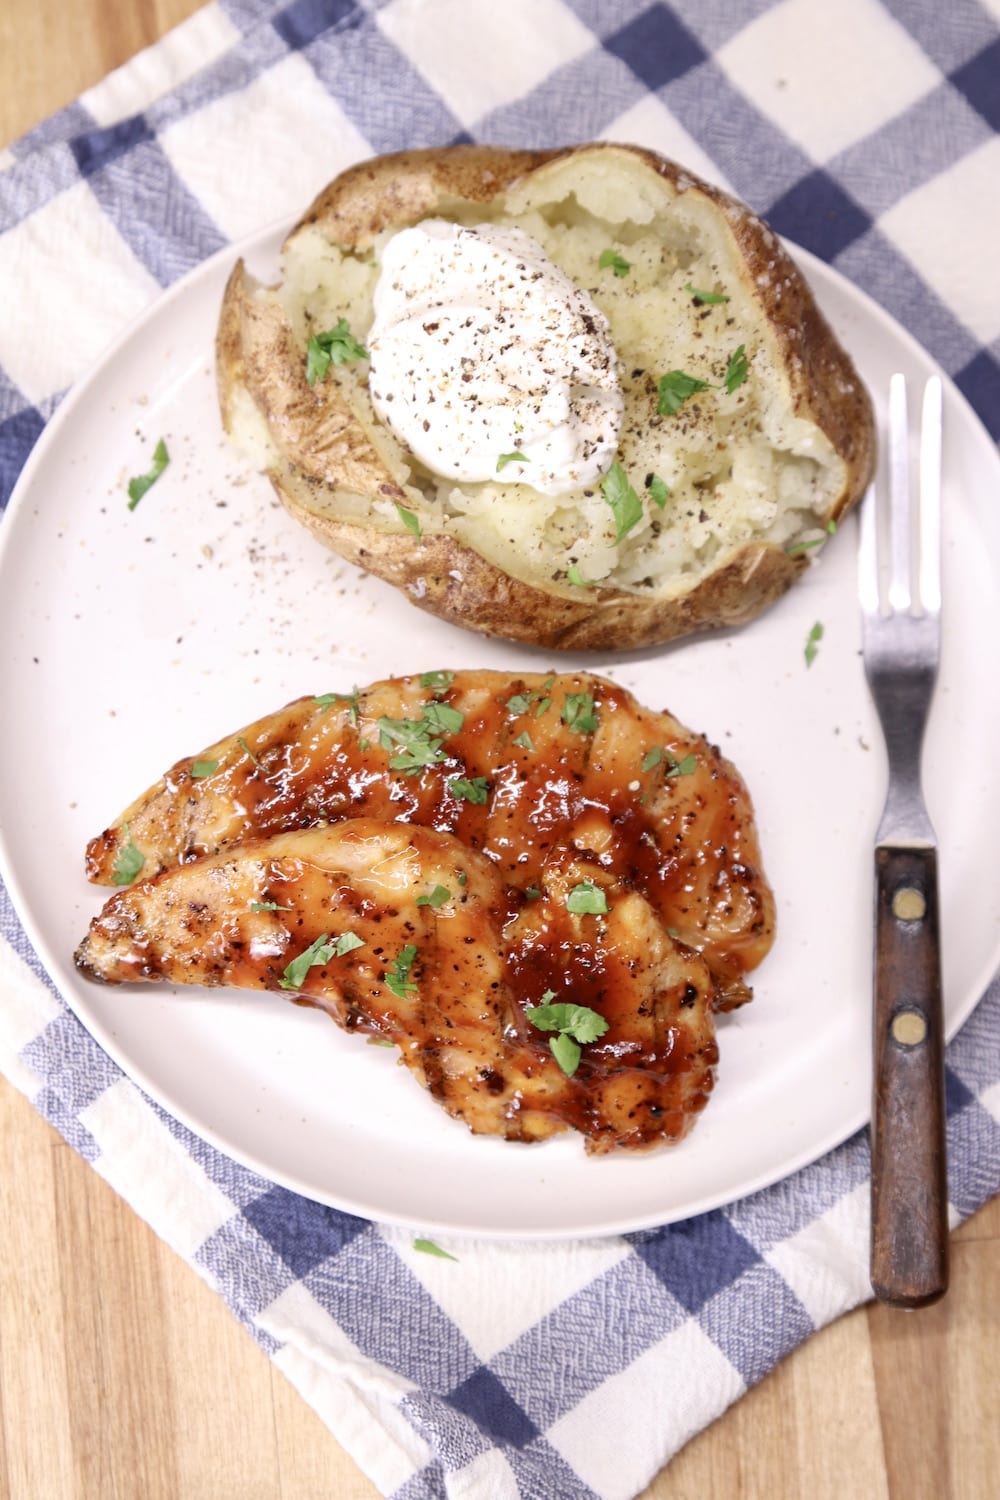 BBQ Chicken Tenders plated with baked potato